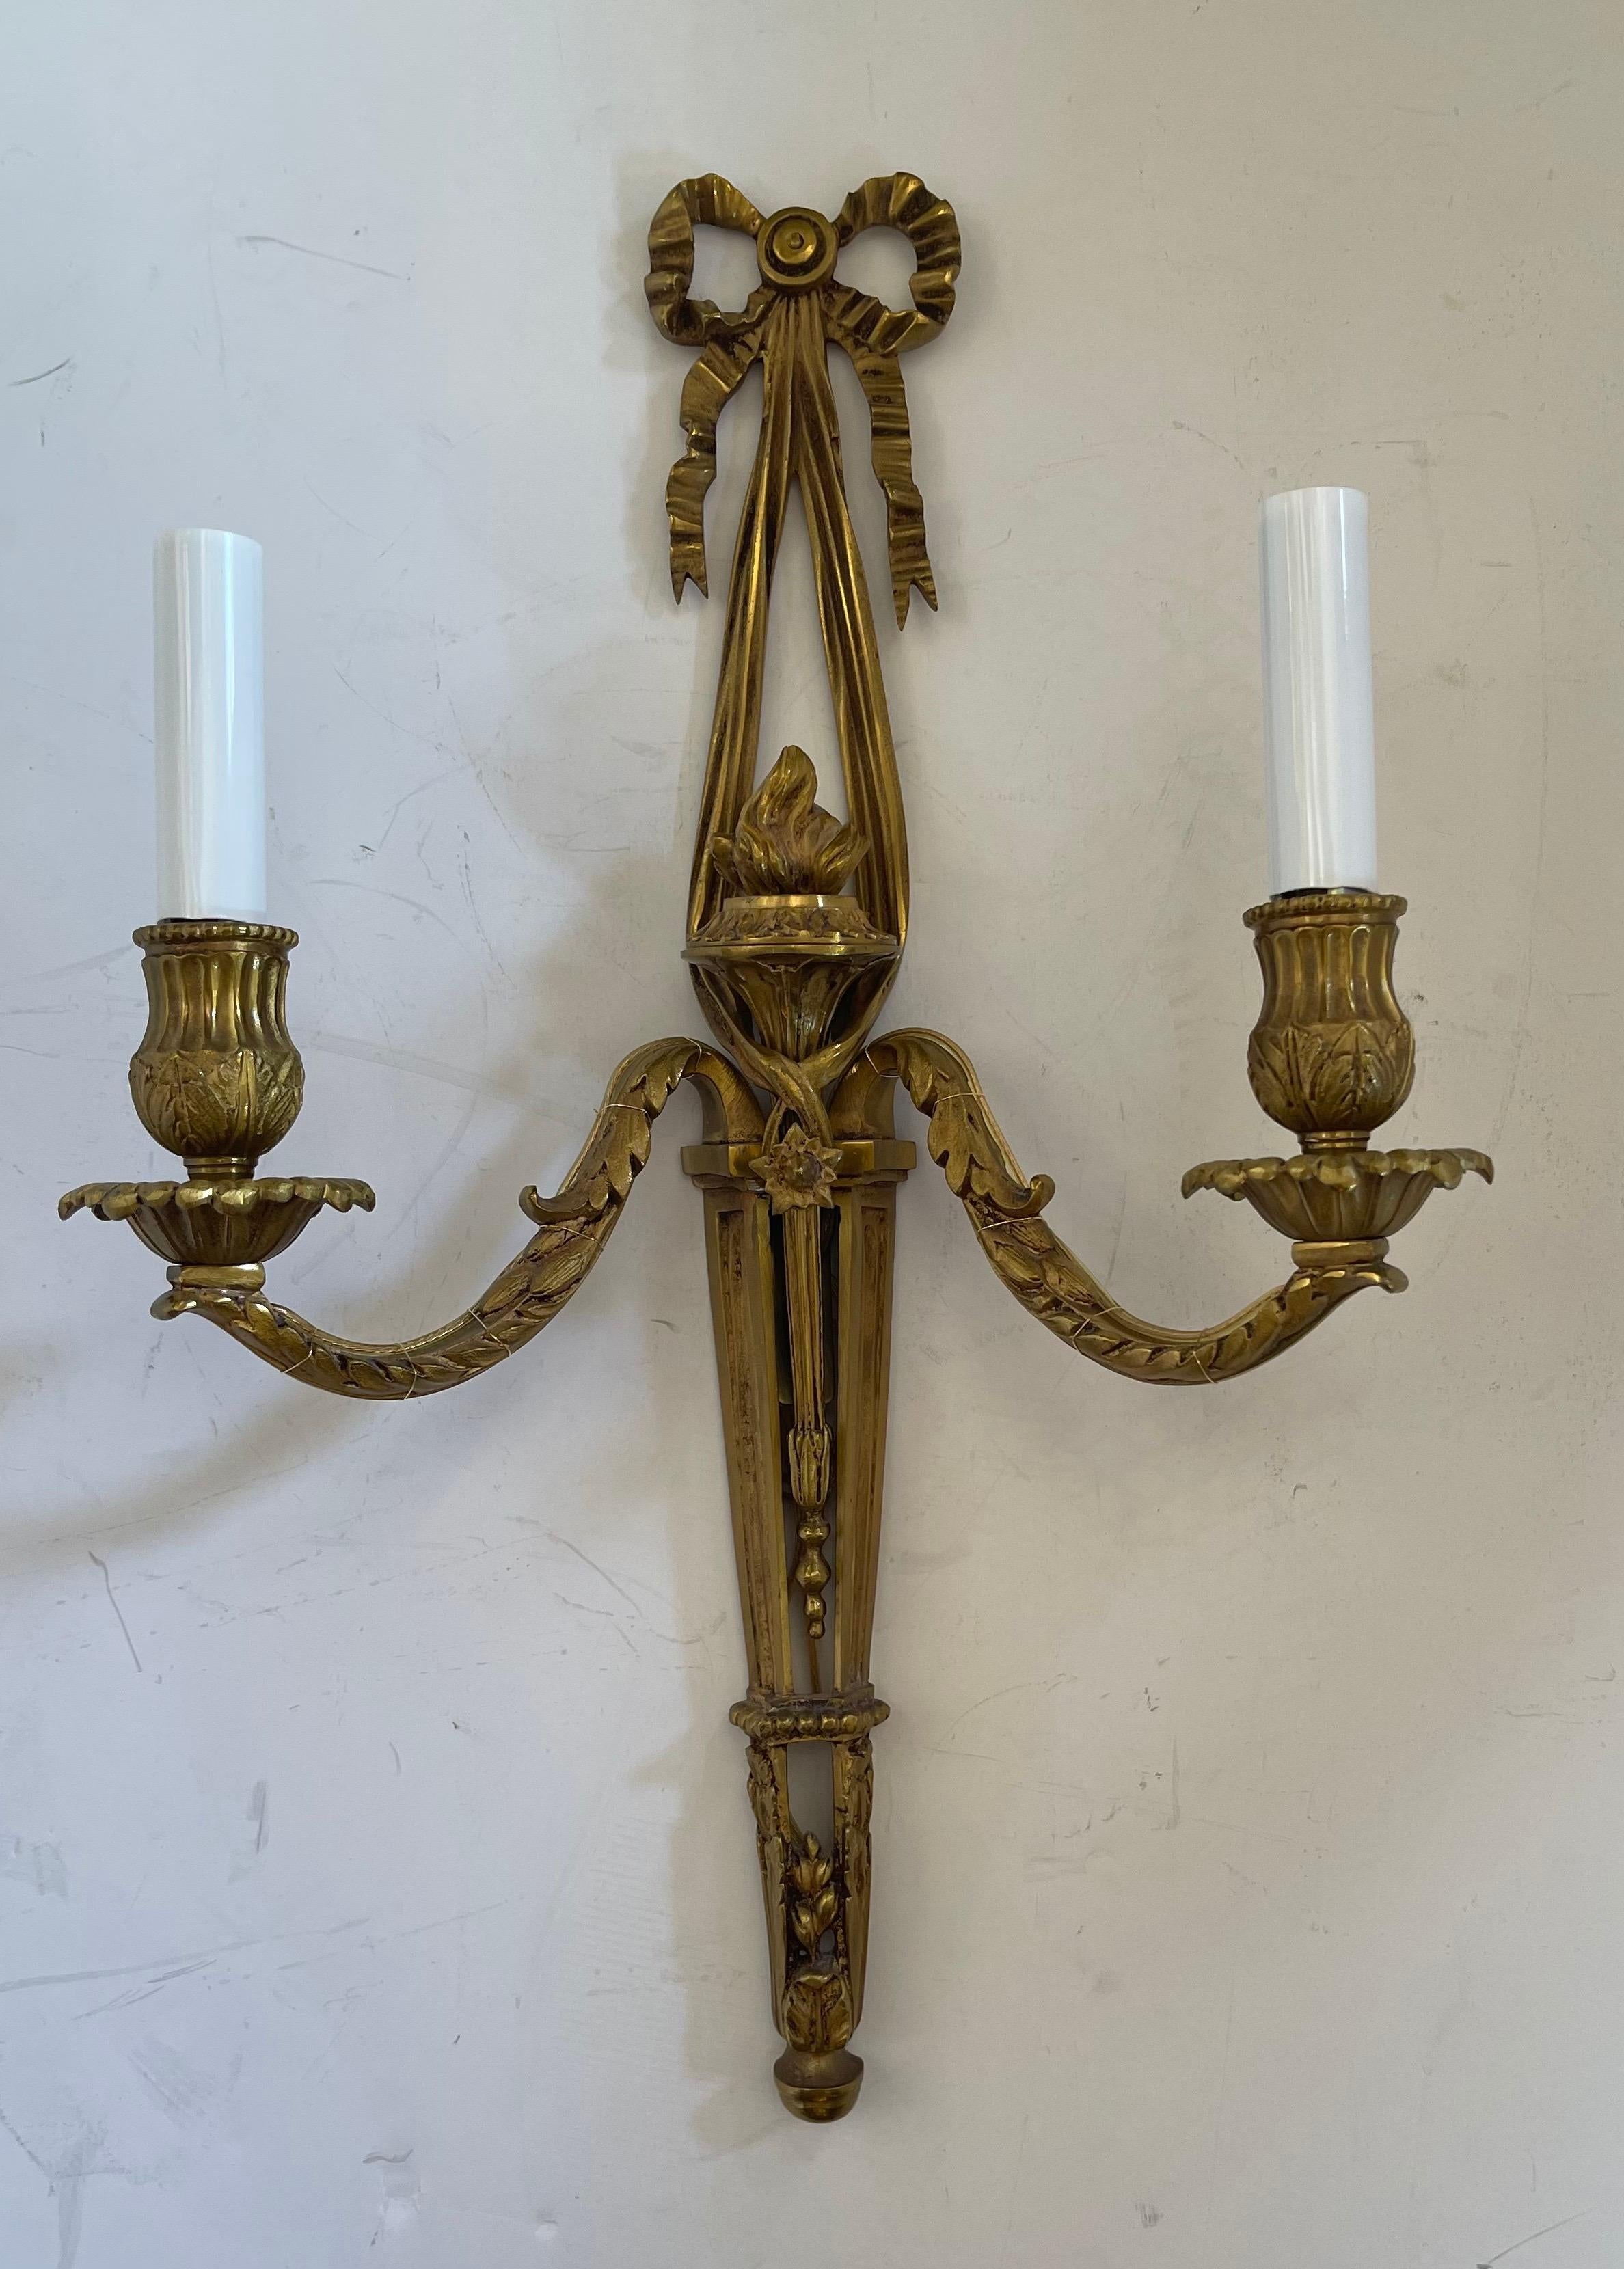 A Wonderful pair of French Dore bronze ribbon top, Torchiere neoclassical rewired two candelabra light sconces.